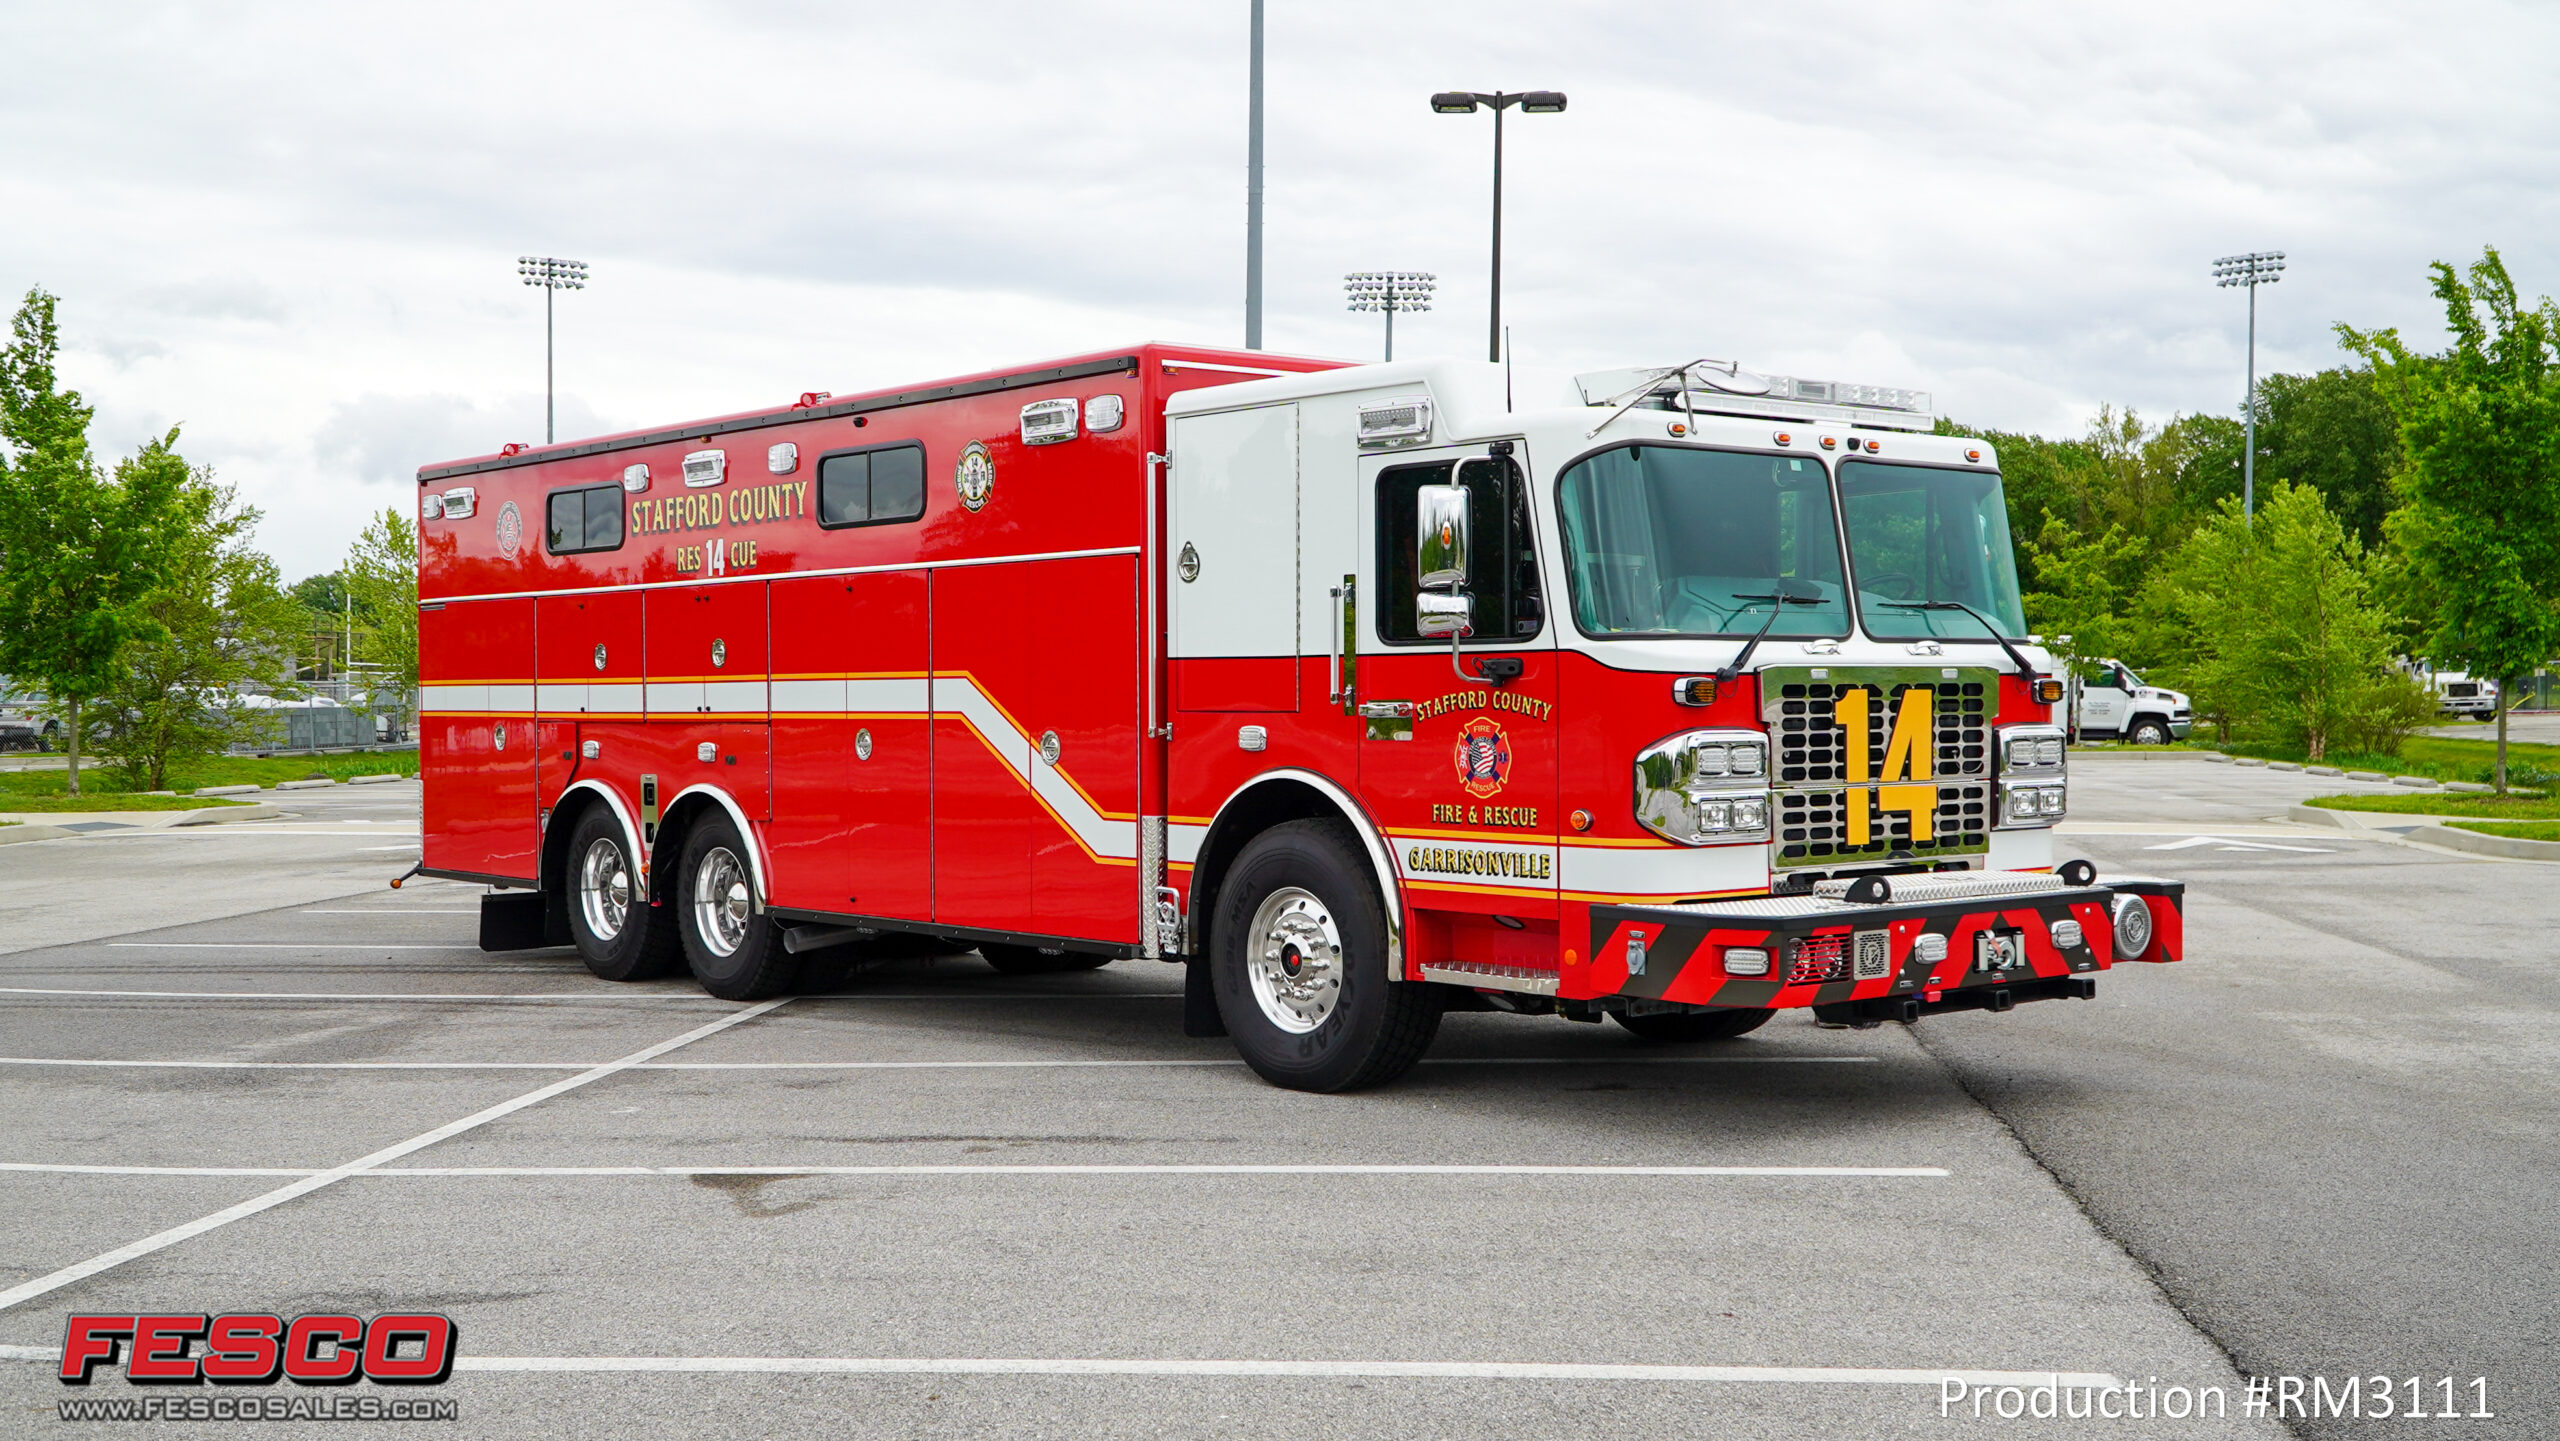 Stafford-County-RM3111-12-scaled New Delivery